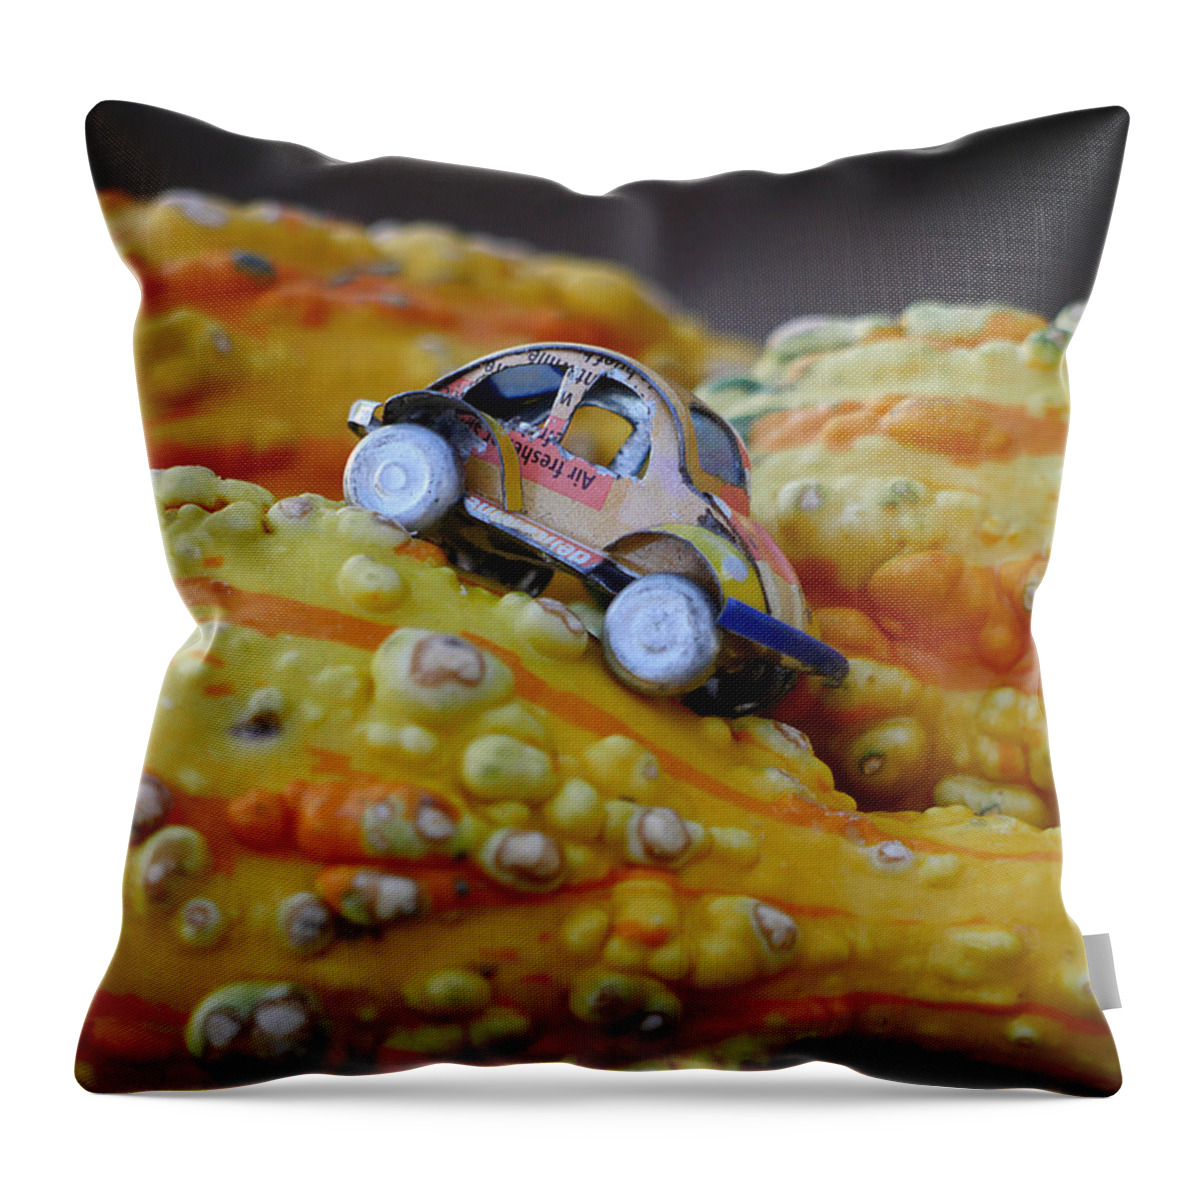 Richard Reeve Throw Pillow featuring the photograph Small Journey by Richard Reeve